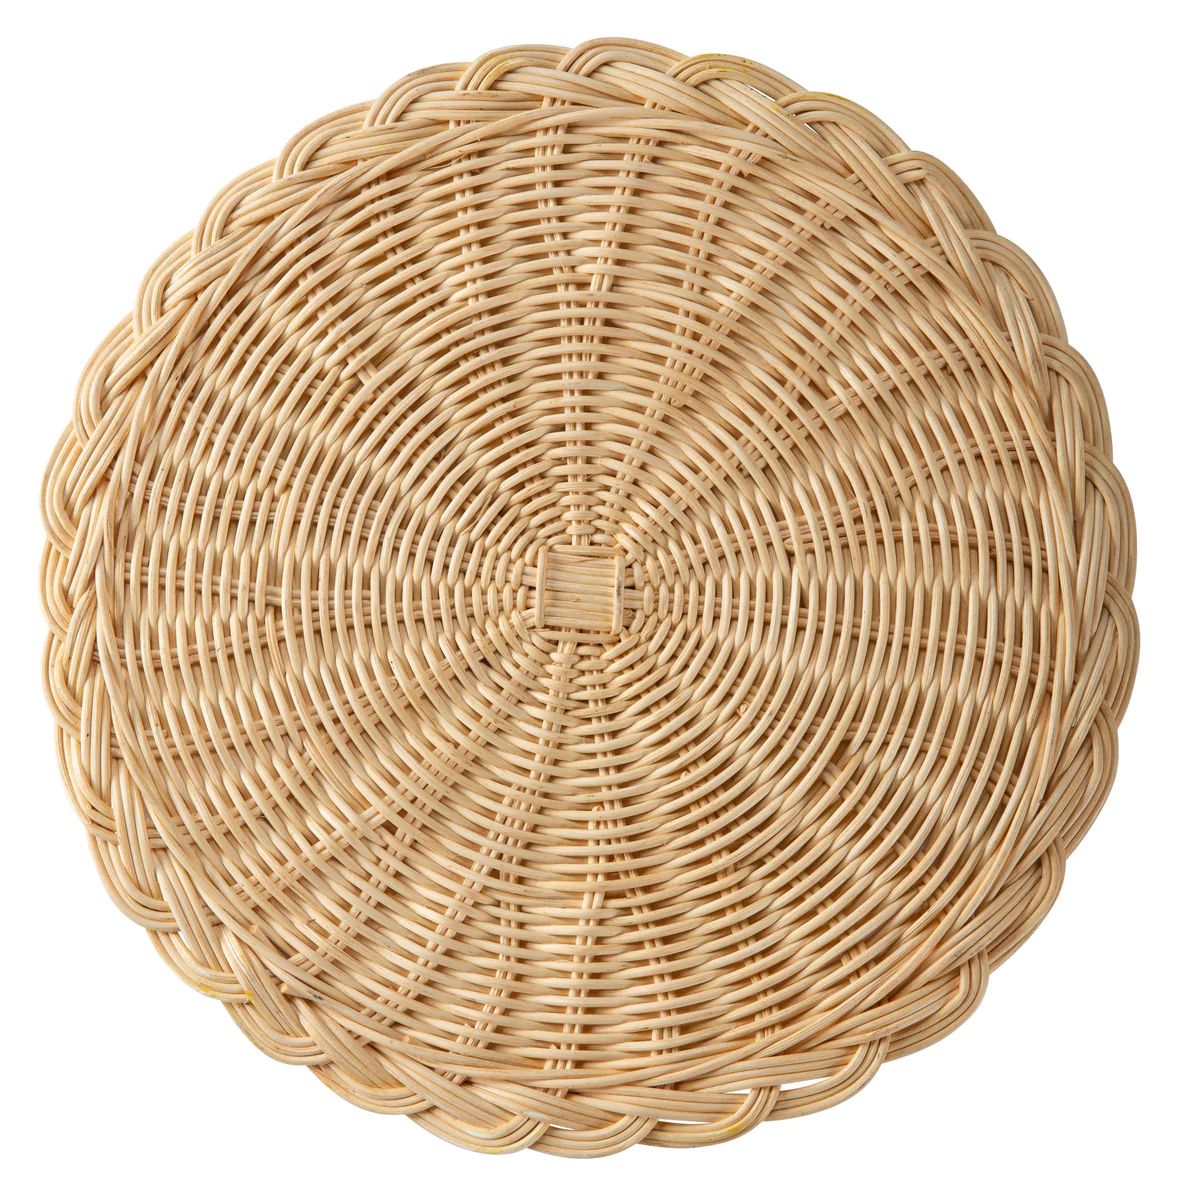 Braided Round Placemat, Set of 4 | Amanda Lindroth